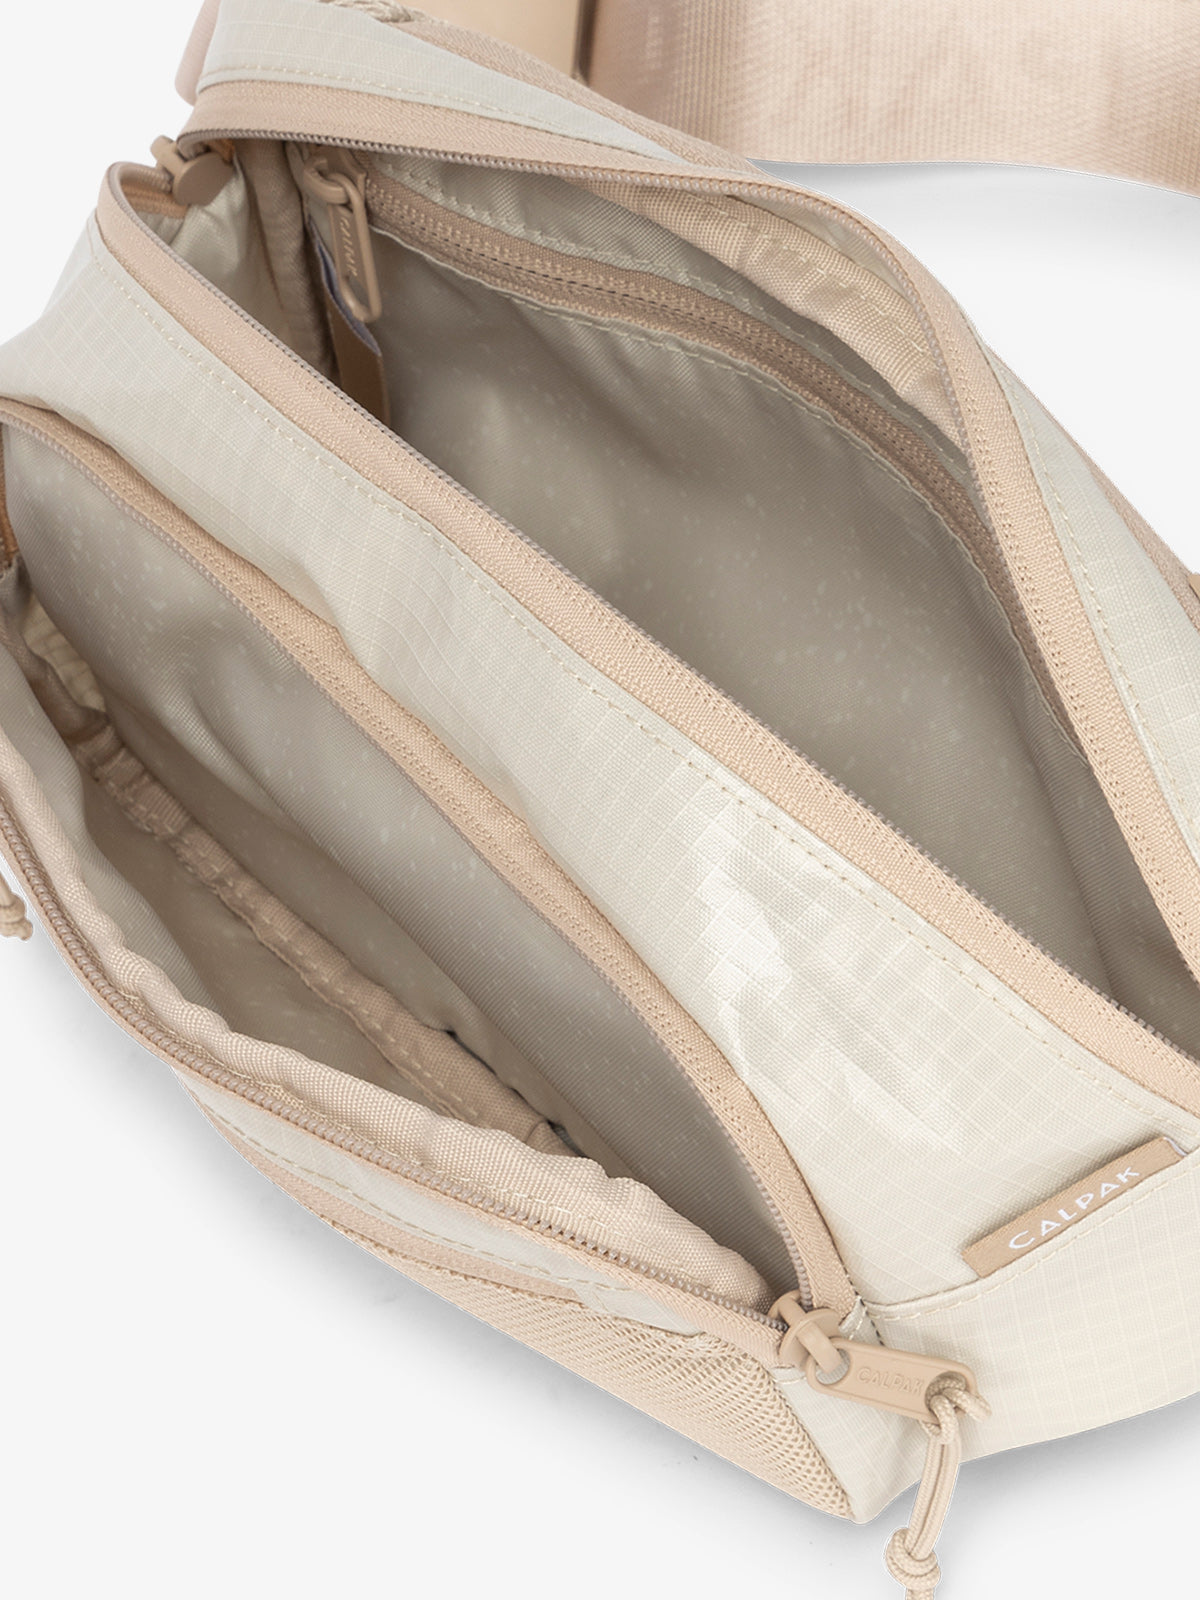 Terra small belt bag with multiple interior pockets and water resistant exterior in white sands